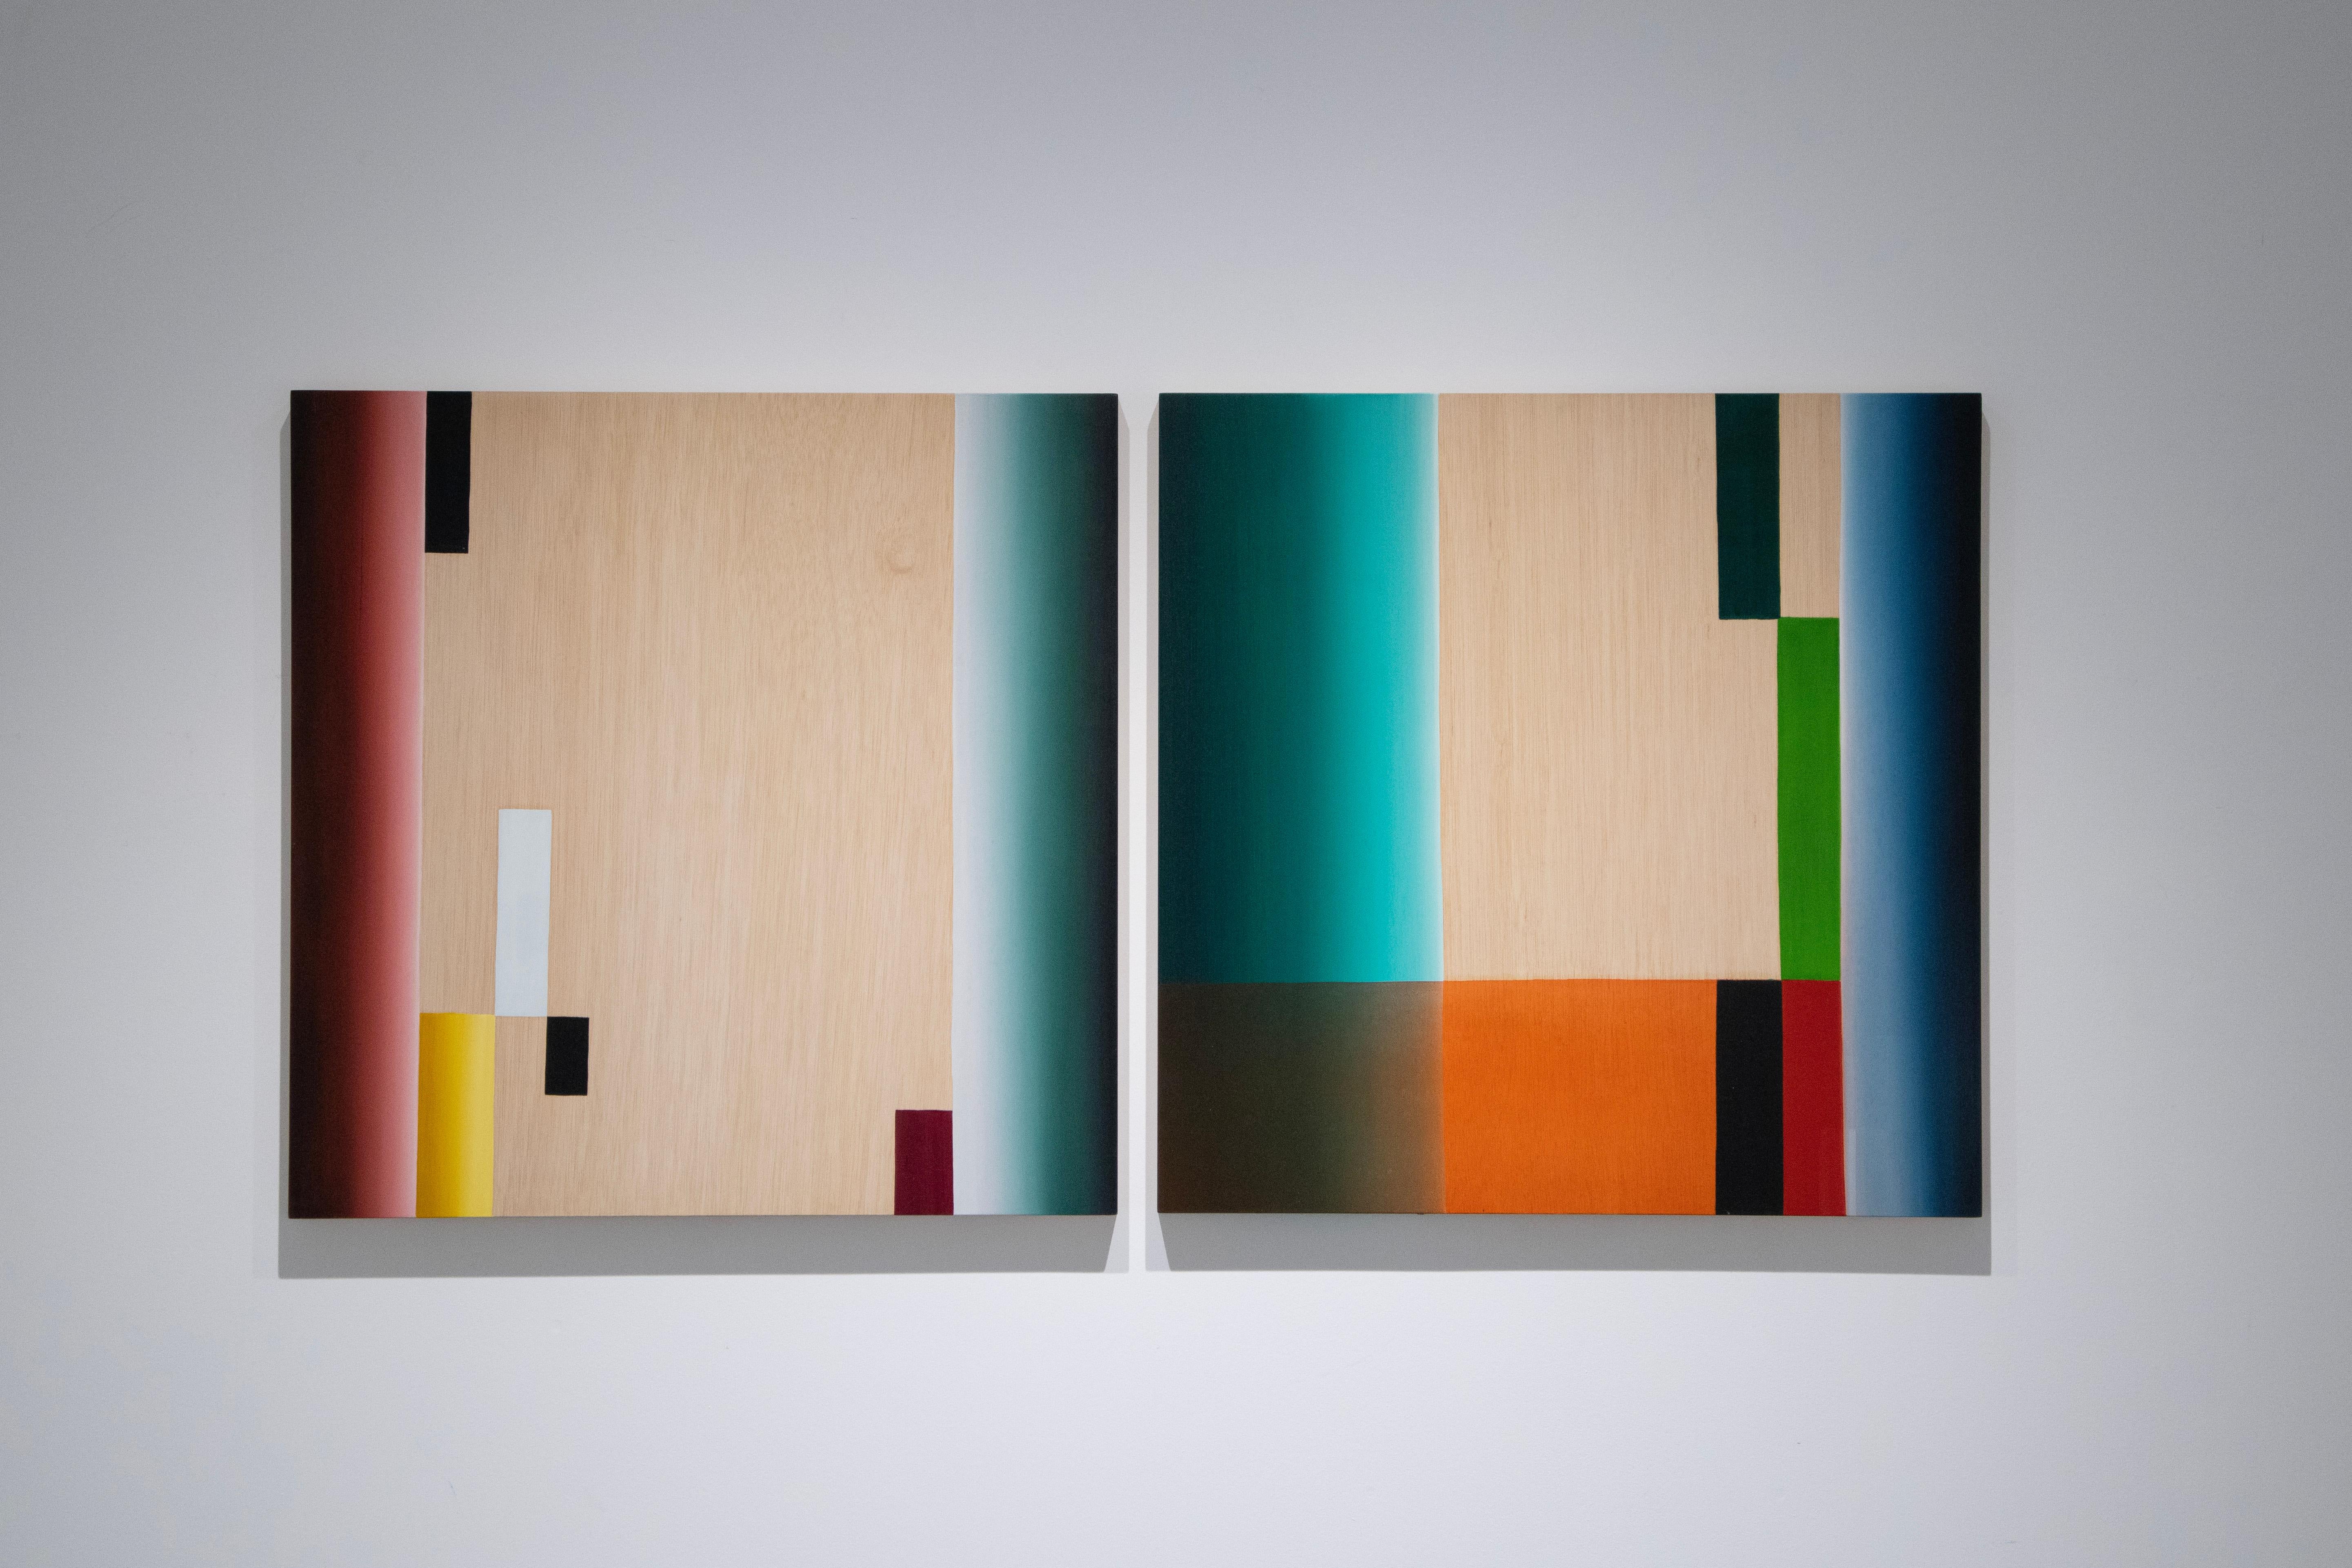 In Between Two- 21st Century, Oil painting, Geometric Abstraction - Painting by Víctor Pérez-Porro